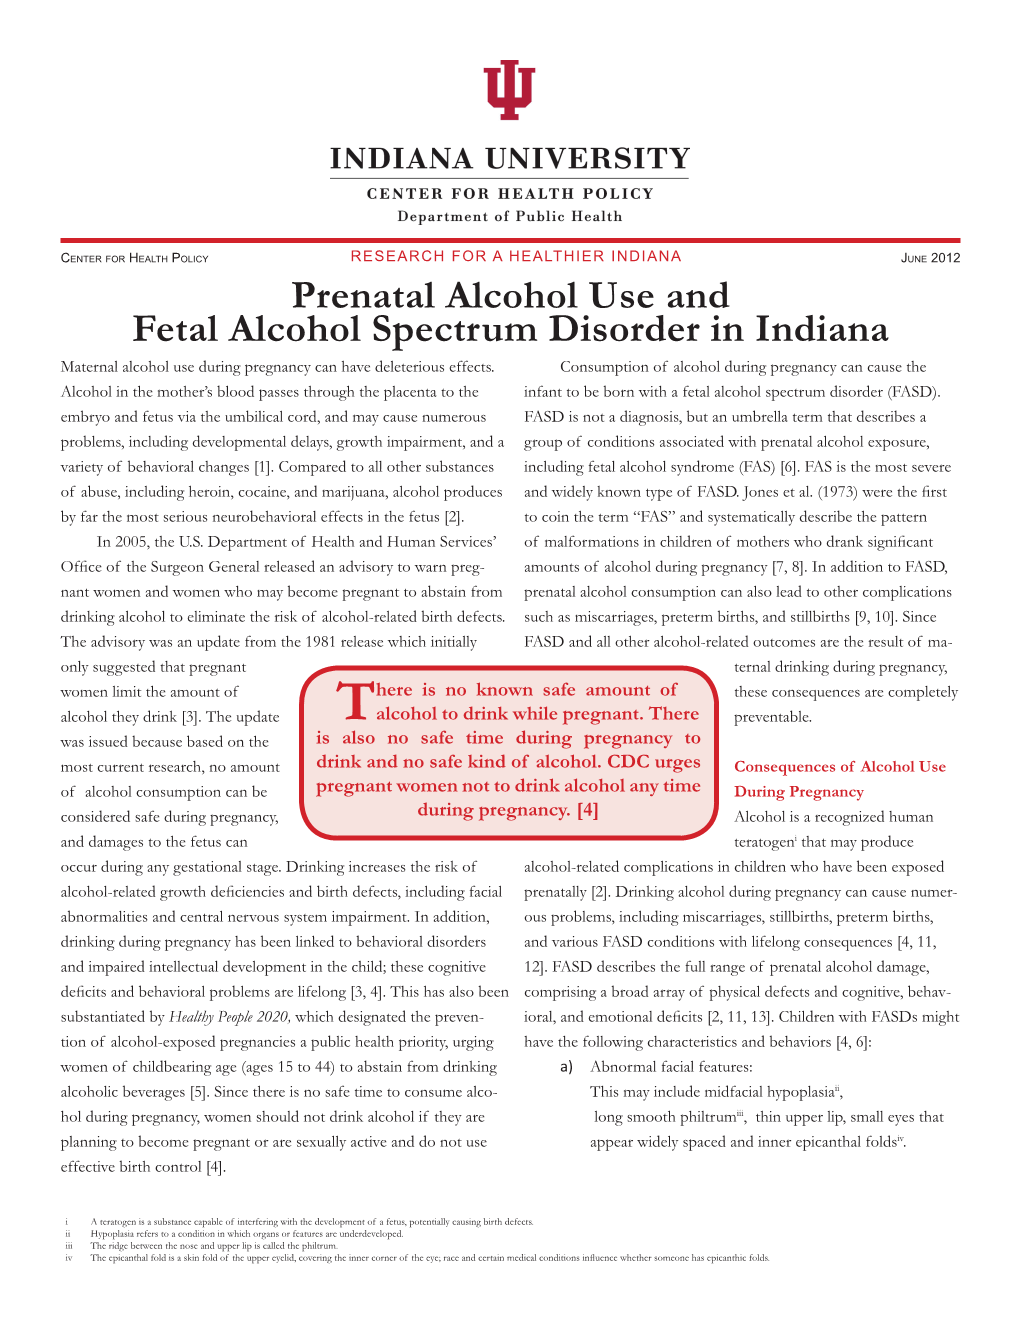 Prenatal Alcohol Use and Fetal Alcohol Spectrum Disorder in Indiana Maternal Alcohol Use During Pregnancy Can Have Deleterious Effects